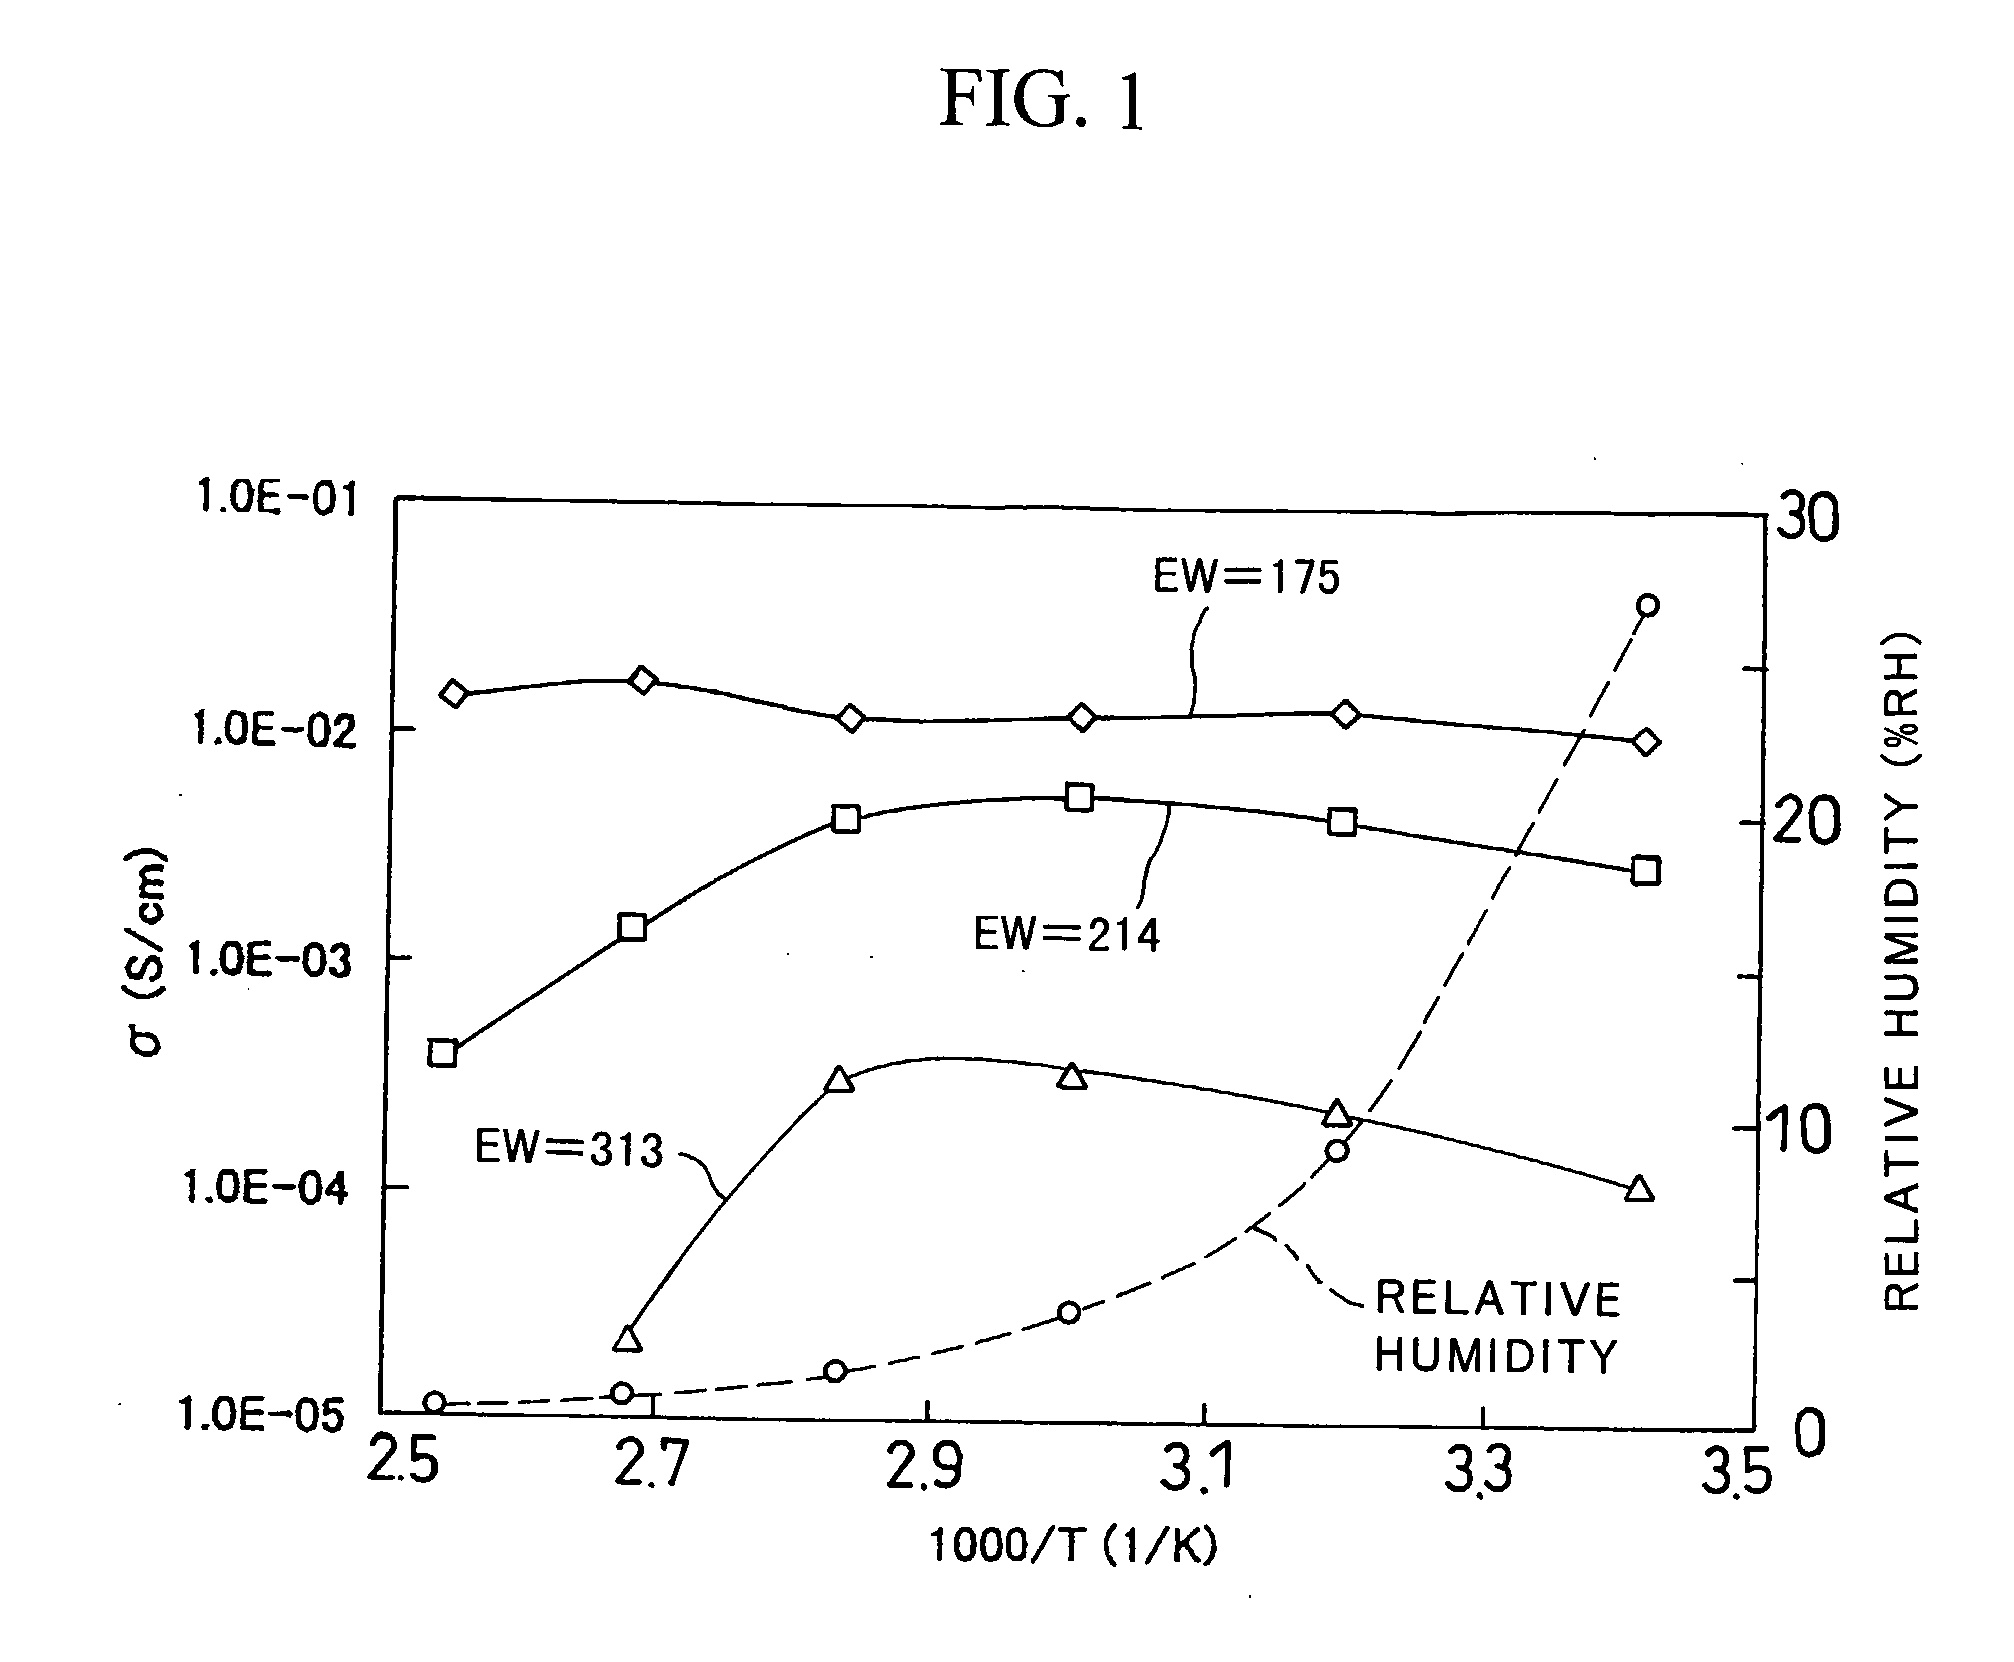 Proton-Conducting Material, Solid Polymer Electrolyte Membrane, and Fuel Cell